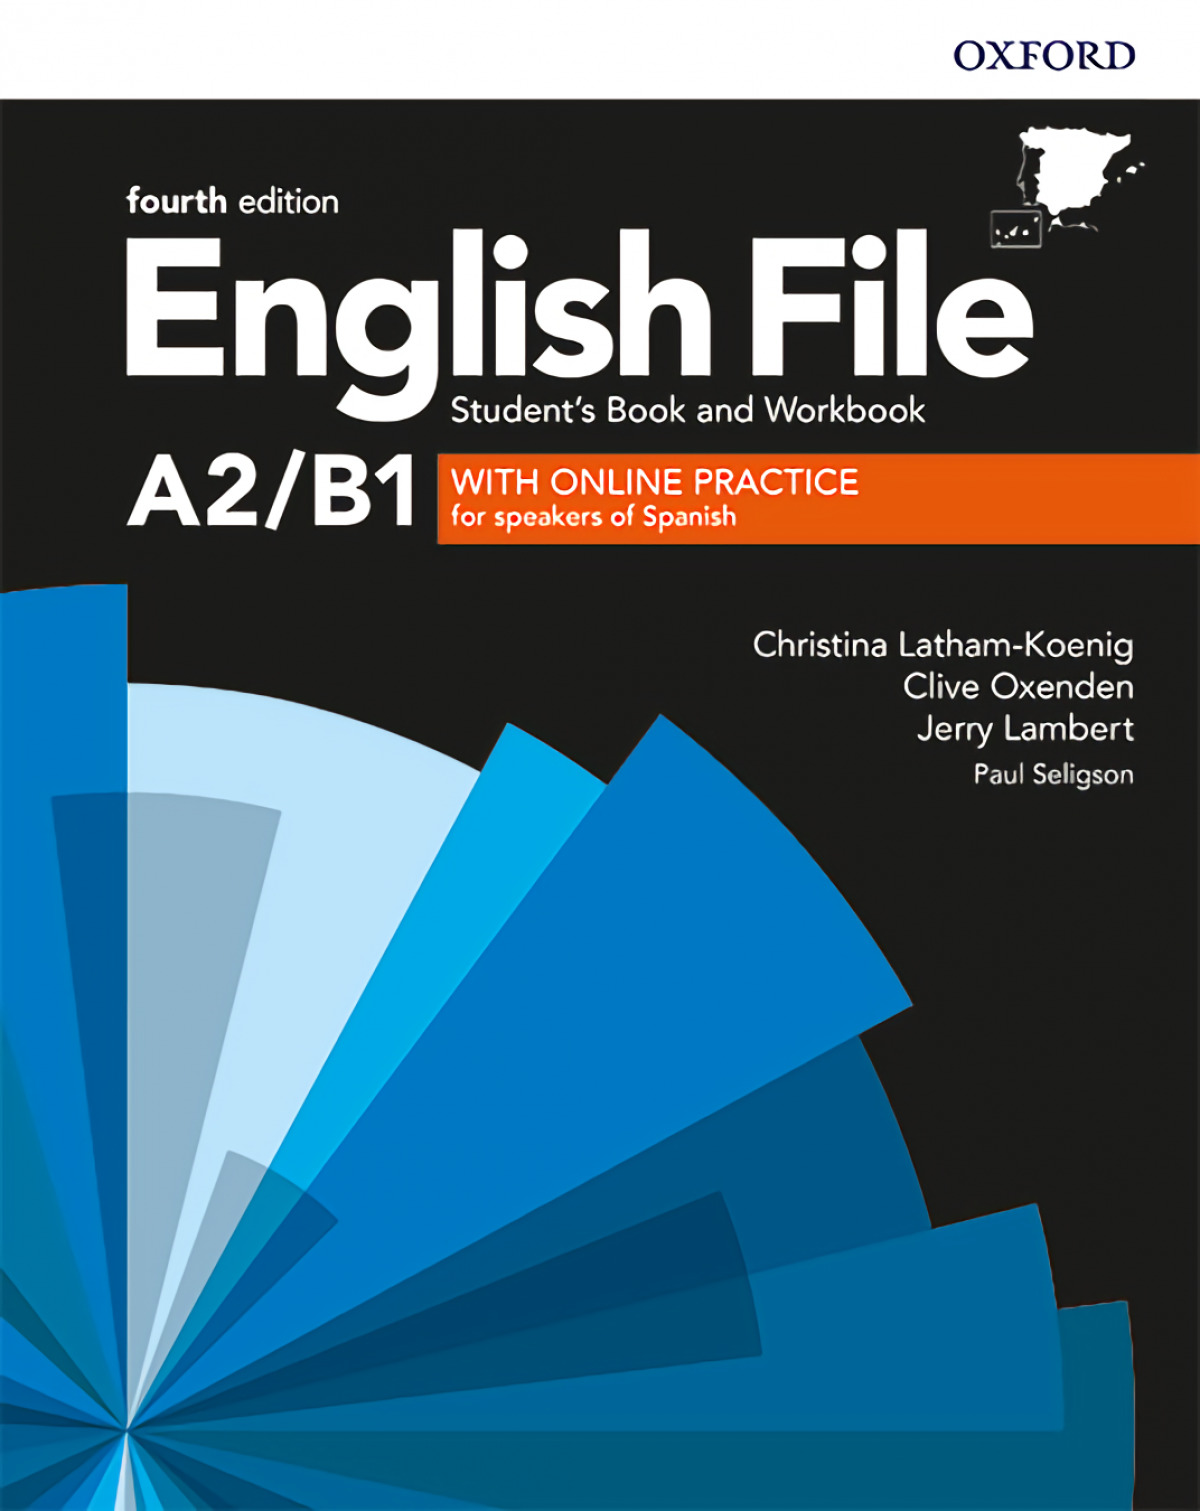 English file pre-intermediate student workbook without online practice workbook fourth edition by Lathan-koenig / Oxenden: Nuevo (2019) | Imosver